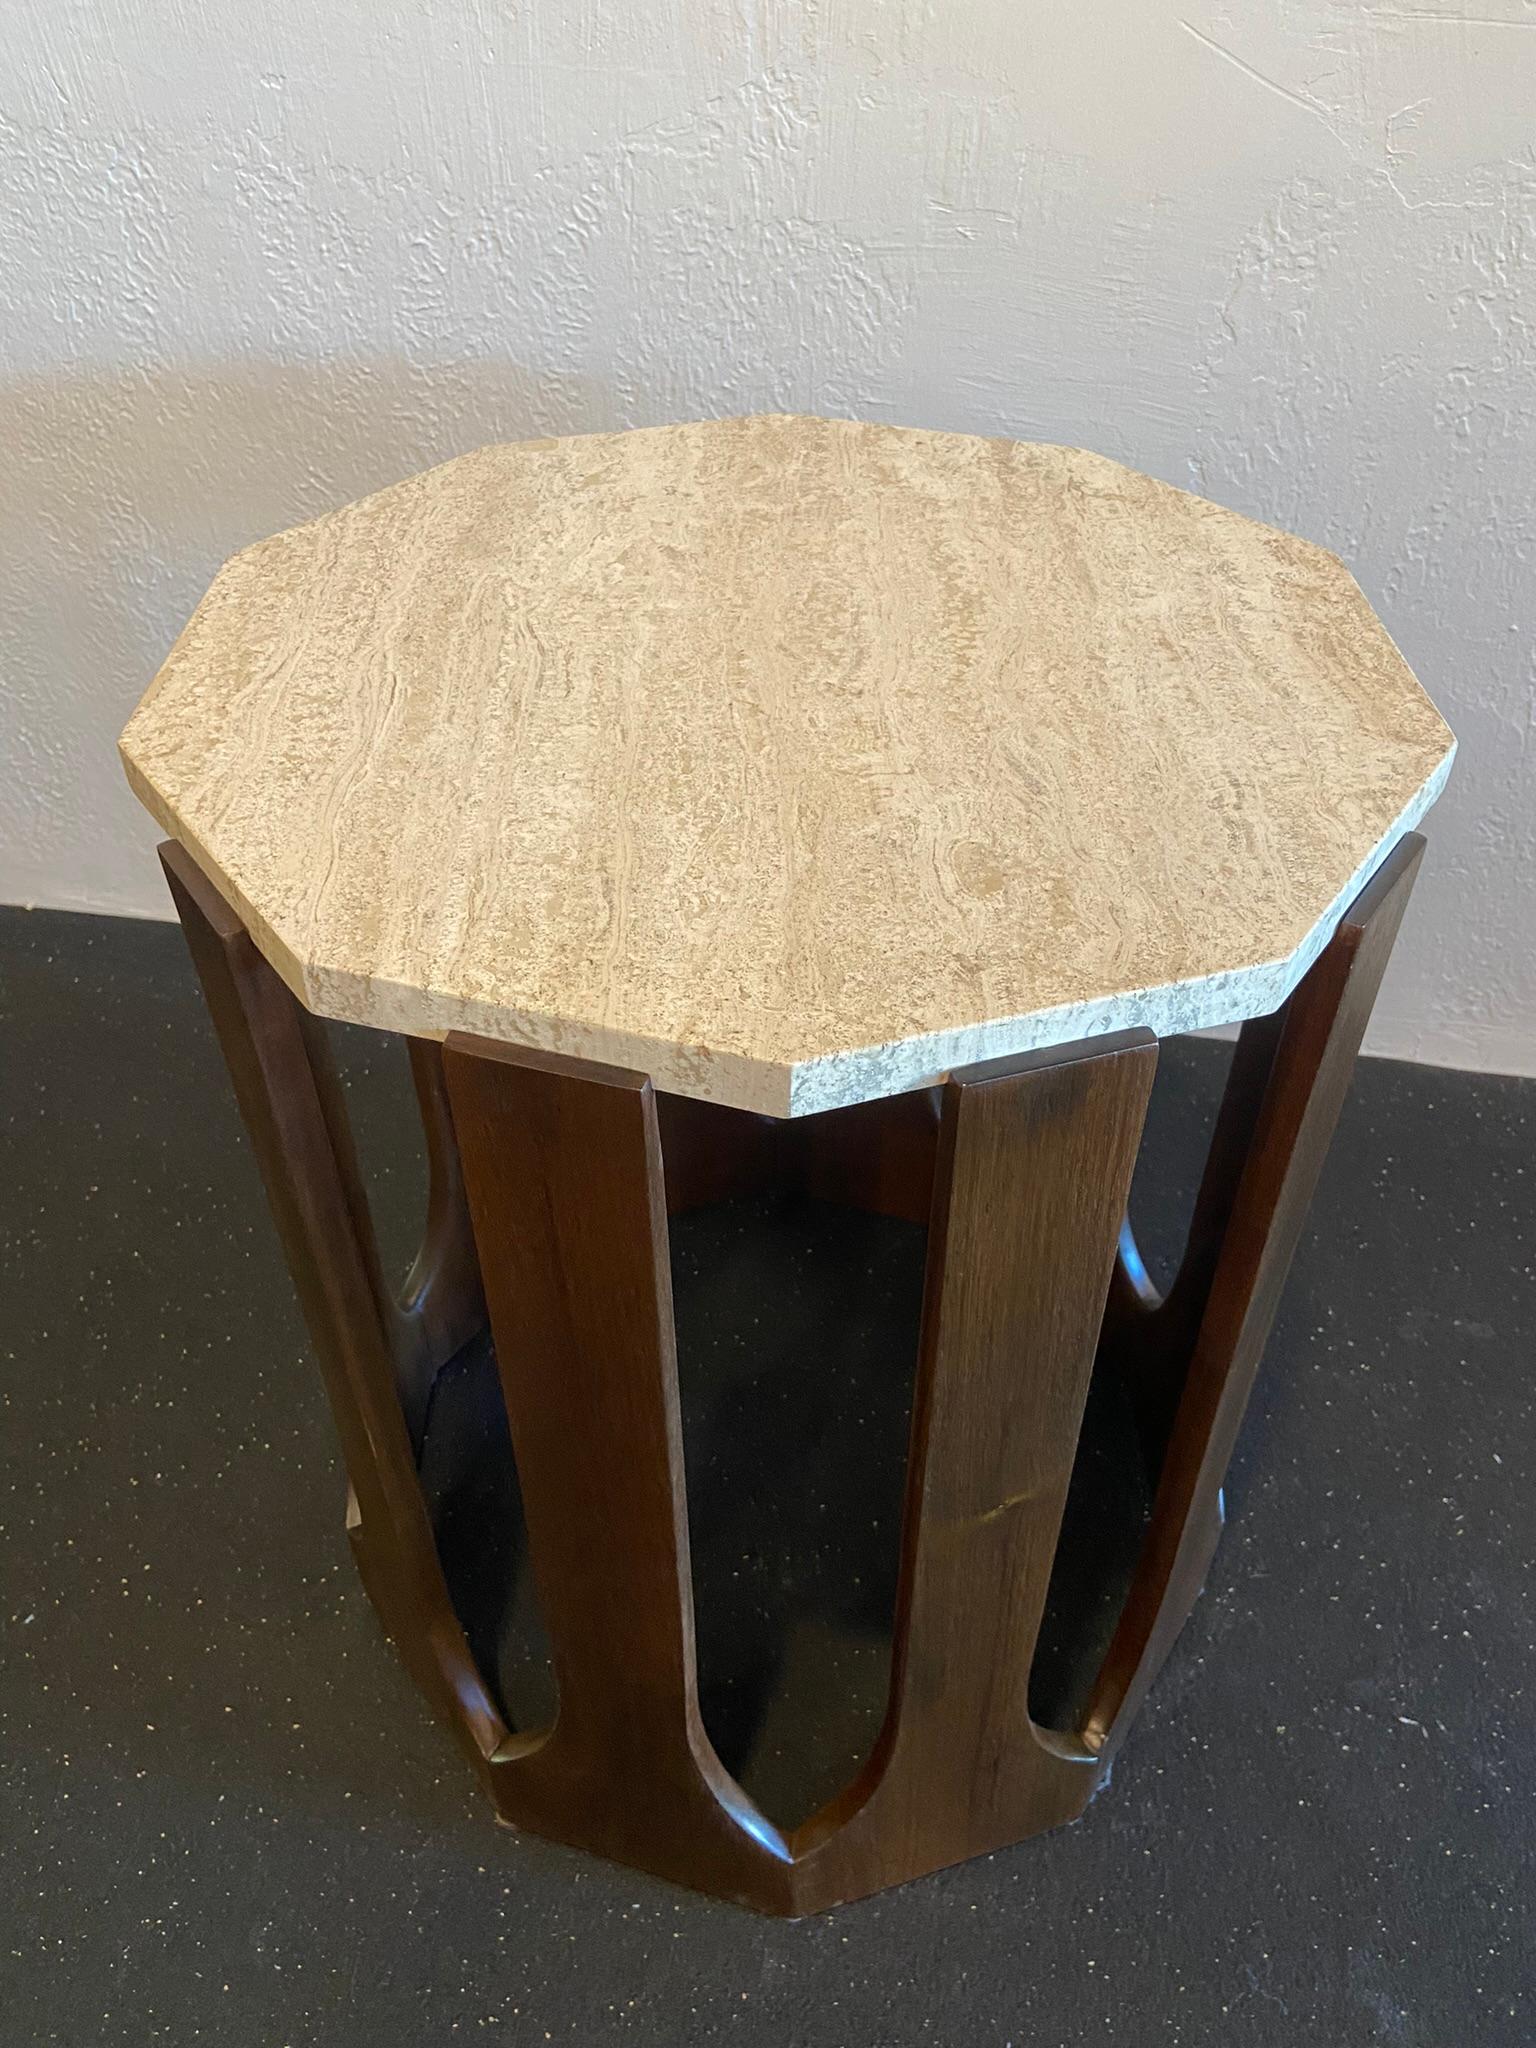 Harvey Probber travertine occasional table. Base constructed of mahogany. Table has been refinished and shows minimal signs of wear (please refer to photos). Mismatched mate to this table available in separate listing.

Would work well in a